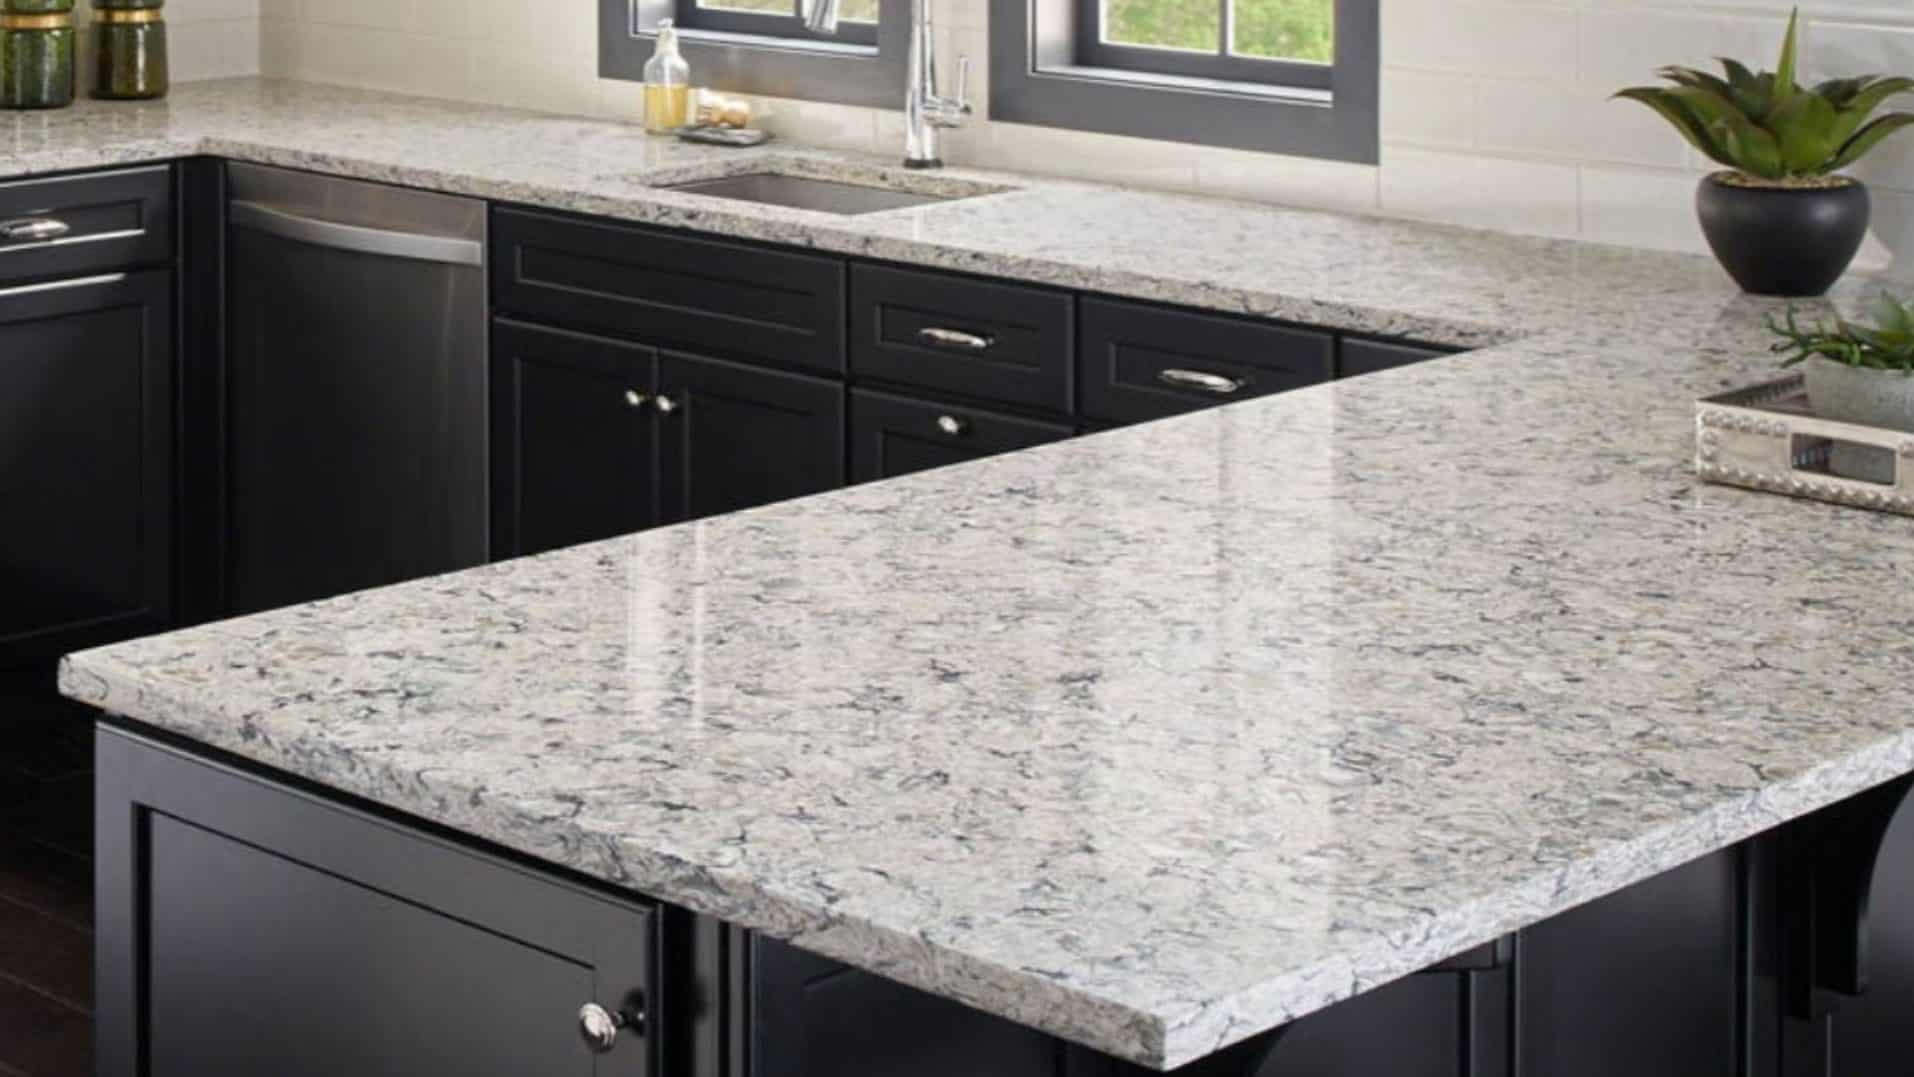 22 Types Of Kitchen Countertops Pros, What Is The Best Option For Kitchen Countertops